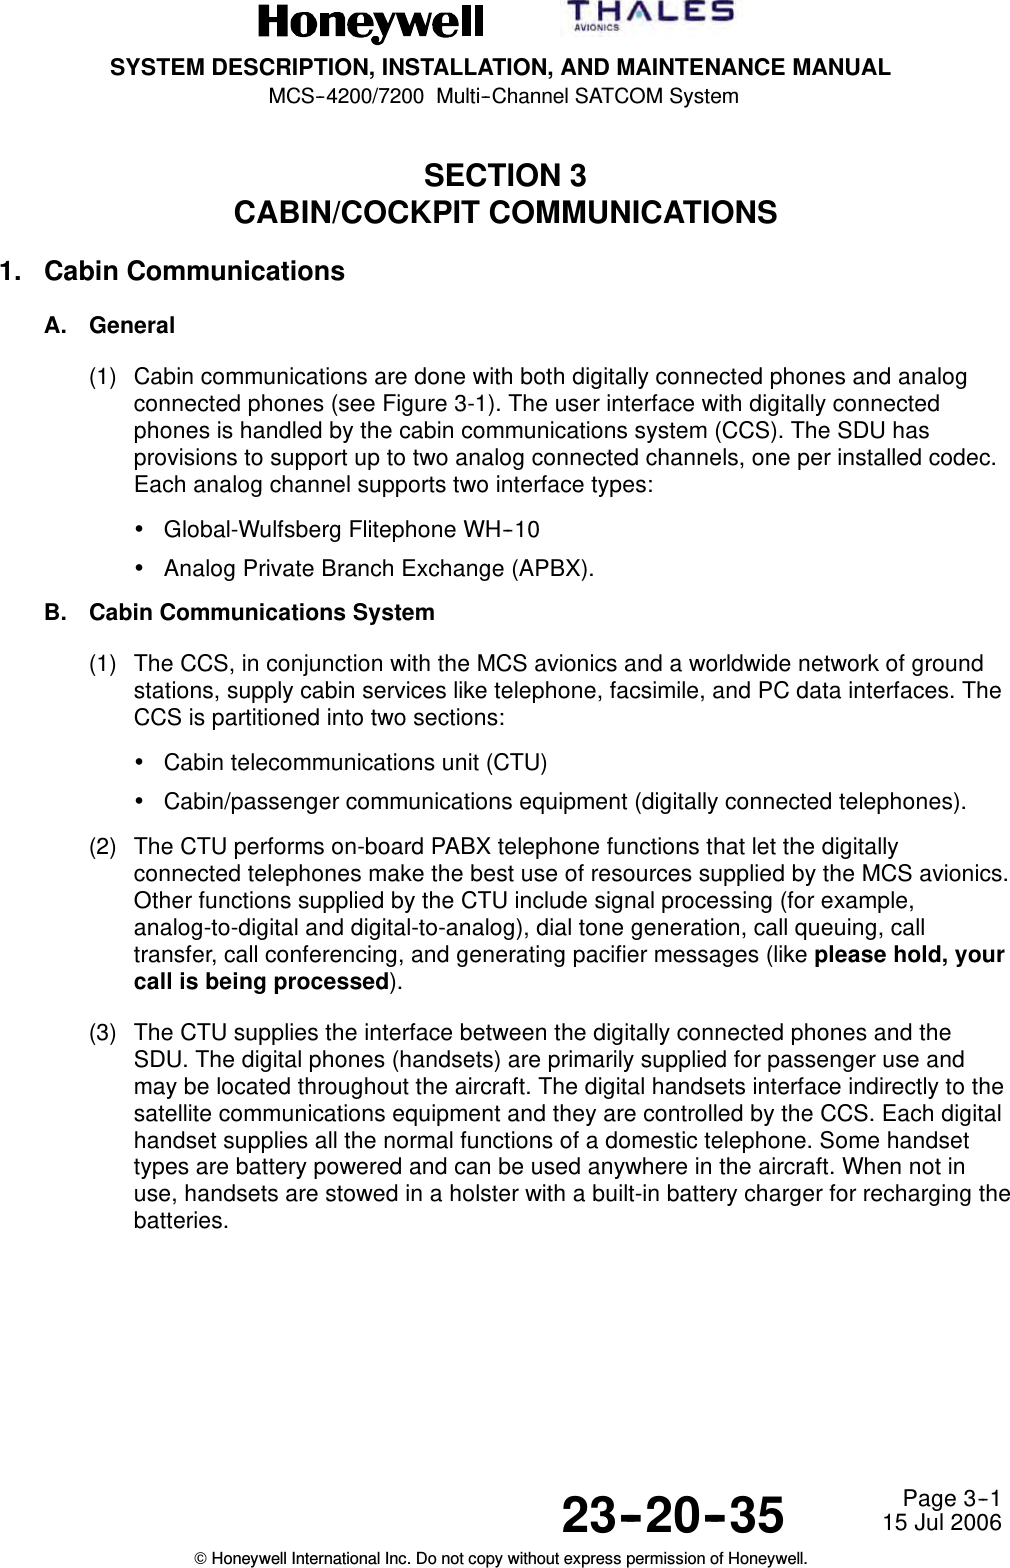 SYSTEM DESCRIPTION, INSTALLATION, AND MAINTENANCE MANUALMCS--4200/7200 Multi--Channel SATCOM System23--20--35 15 Jul 2006Honeywell International Inc. Do not copy without express permission of Honeywell.Page 3--1SECTION 3CABIN/COCKPIT COMMUNICATIONS1. Cabin CommunicationsA. General(1) Cabin communications are done with both digitally connected phones and analogconnected phones (see Figure 3-1). The user interface with digitally connectedphones is handled by the cabin communications system (CCS). The SDU hasprovisions to support up to two analog connected channels, one per installed codec.Each analog channel supports two interface types:•Global-Wulfsberg Flitephone WH--10•Analog Private Branch Exchange (APBX).B. Cabin Communications System(1) The CCS, in conjunction with the MCS avionics and a worldwide network of groundstations, supply cabin services like telephone, facsimile, and PC data interfaces. TheCCS is partitioned into two sections:•Cabin telecommunications unit (CTU)•Cabin/passenger communications equipment (digitally connected telephones).(2) The CTU performs on-board PABX telephone functions that let the digitallyconnected telephones make the best use of resources supplied by the MCS avionics.Other functions supplied by the CTU include signal processing (for example,analog-to-digital and digital-to-analog), dial tone generation, call queuing, calltransfer, call conferencing, and generating pacifier messages (like please hold, yourcall is being processed).(3) The CTU supplies the interface between the digitally connected phones and theSDU. The digital phones (handsets) are primarily supplied for passenger use andmay be located throughout the aircraft. The digital handsets interface indirectly to thesatellite communications equipment and they are controlled by the CCS. Each digitalhandset supplies all the normal functions of a domestic telephone. Some handsettypes are battery powered and can be used anywhere in the aircraft. When not inuse, handsets are stowed in a holster with a built-in battery charger for recharging thebatteries.